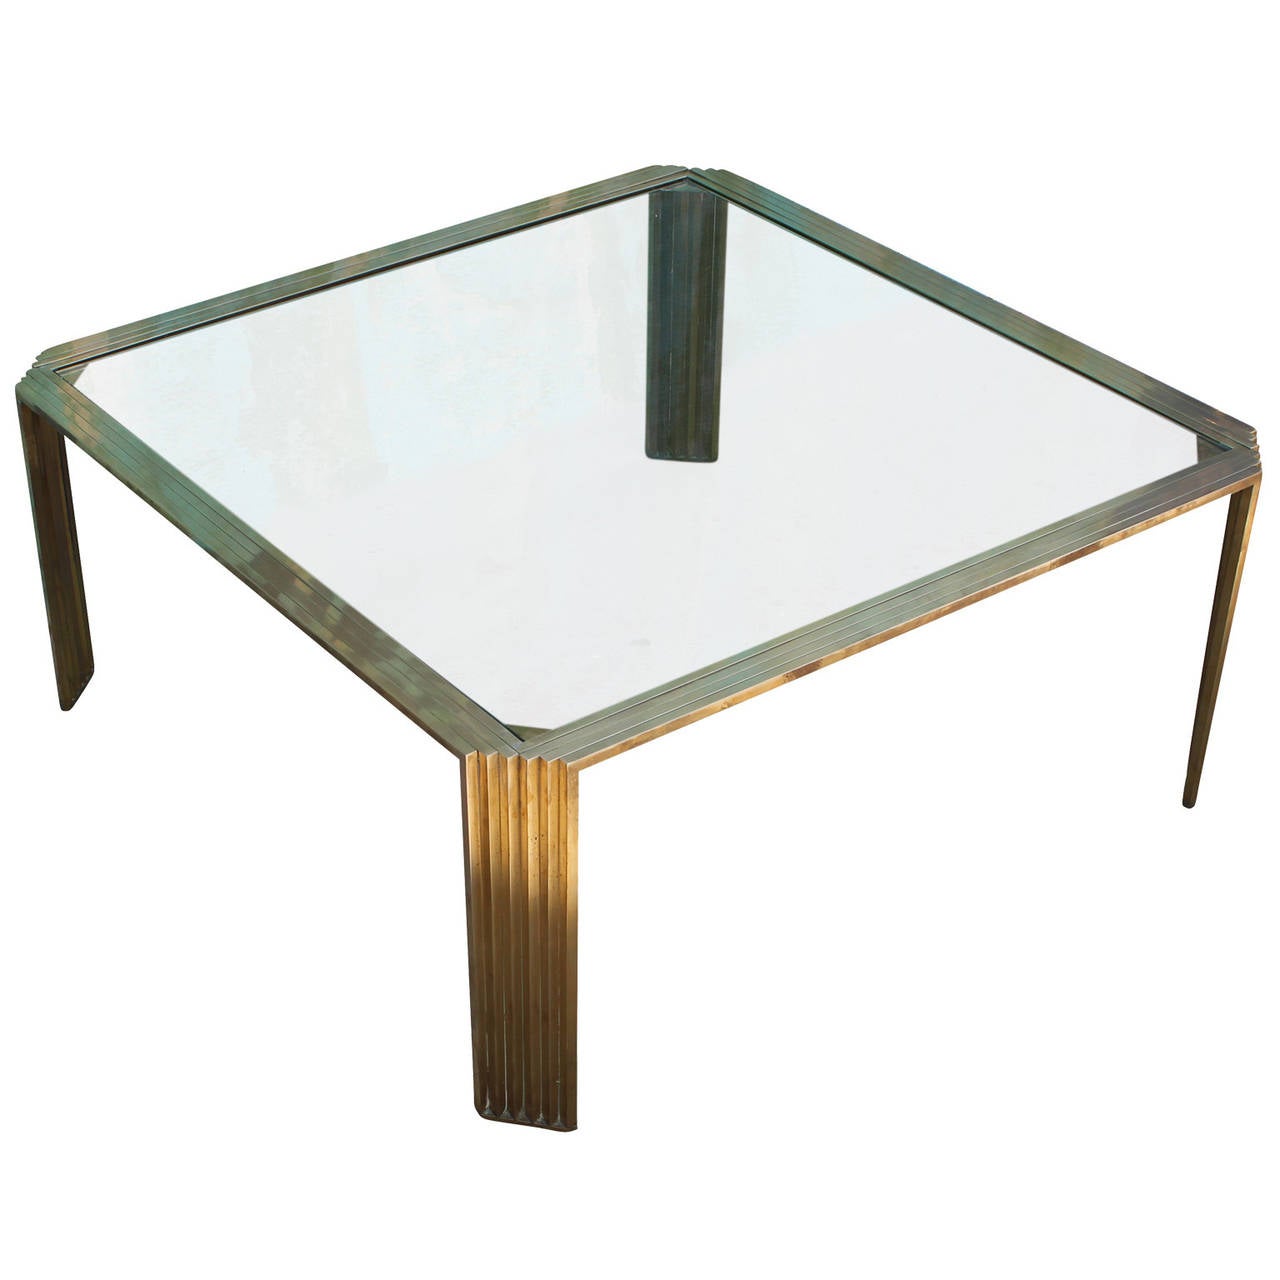 Incredible solid brass Romeo Rega style square coffee table with a glass top. Made in Italy the table in excellent vintage condition. Table can be highly polished or allowed to patina to a more bronze color.